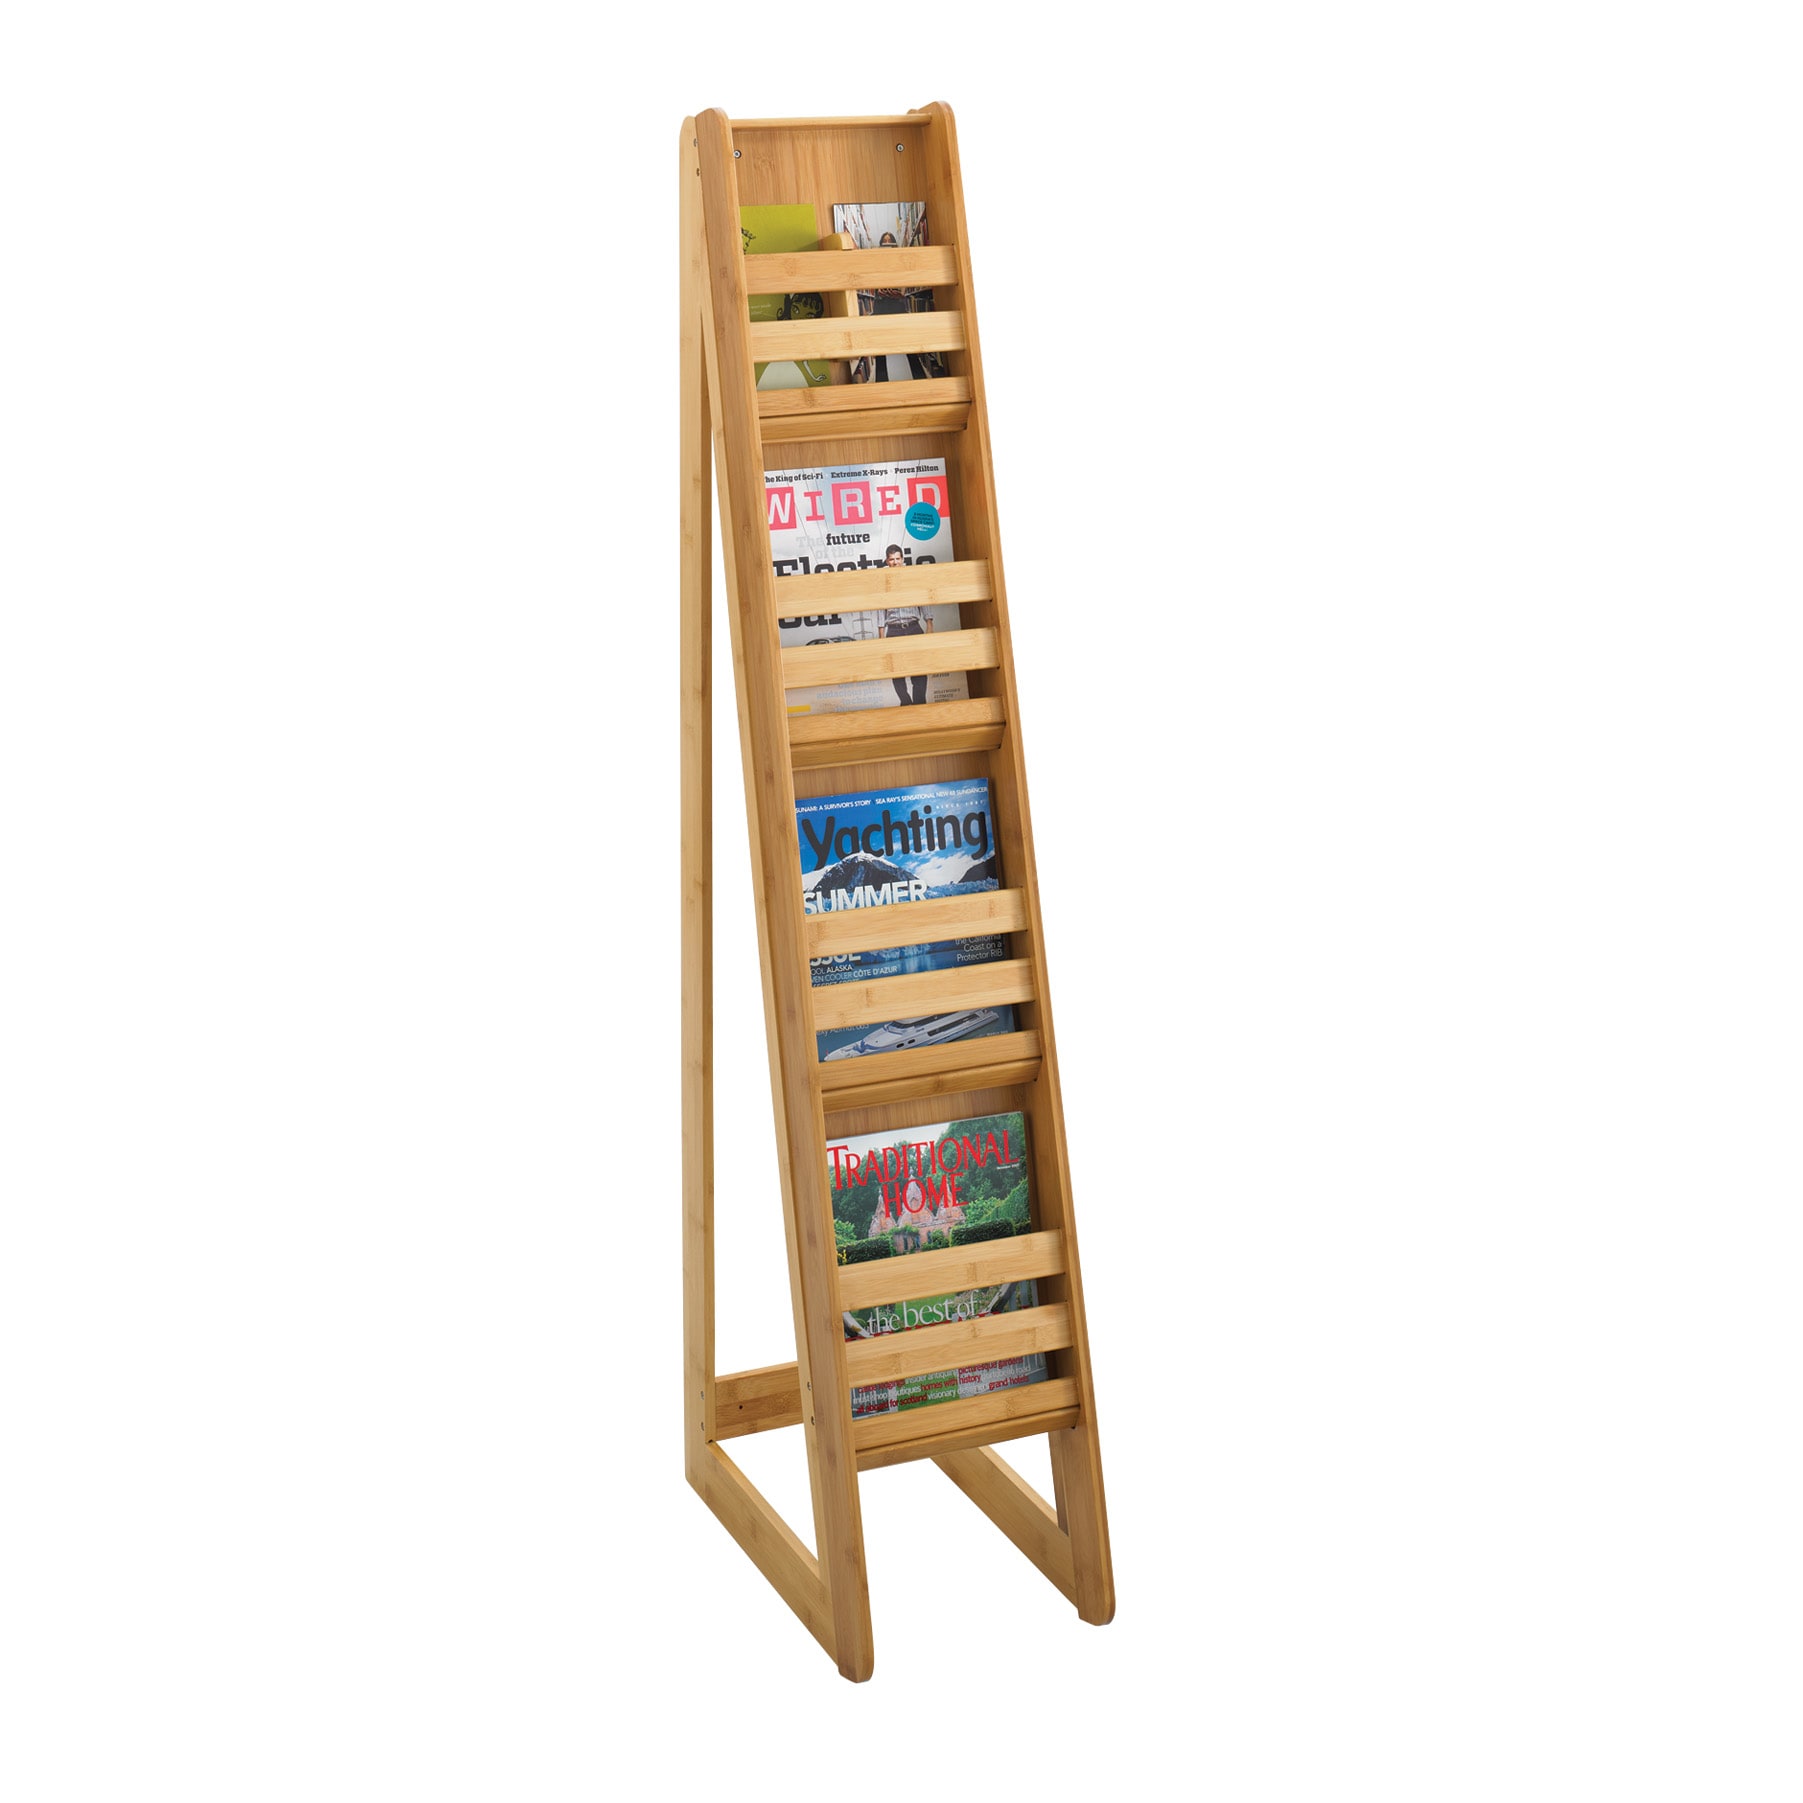 Safco Bamboo Magazine Floor Display 4 Pocket (Cherry, natural Material Bamboo Pockets Four (4) Dimensions 56.5 inches high x 10 inches wide x 18.25 inches deep Bamboo Pockets Four (4) Dimensions 56.5 inches high x 10 inches wide x 18.25 inches deep)